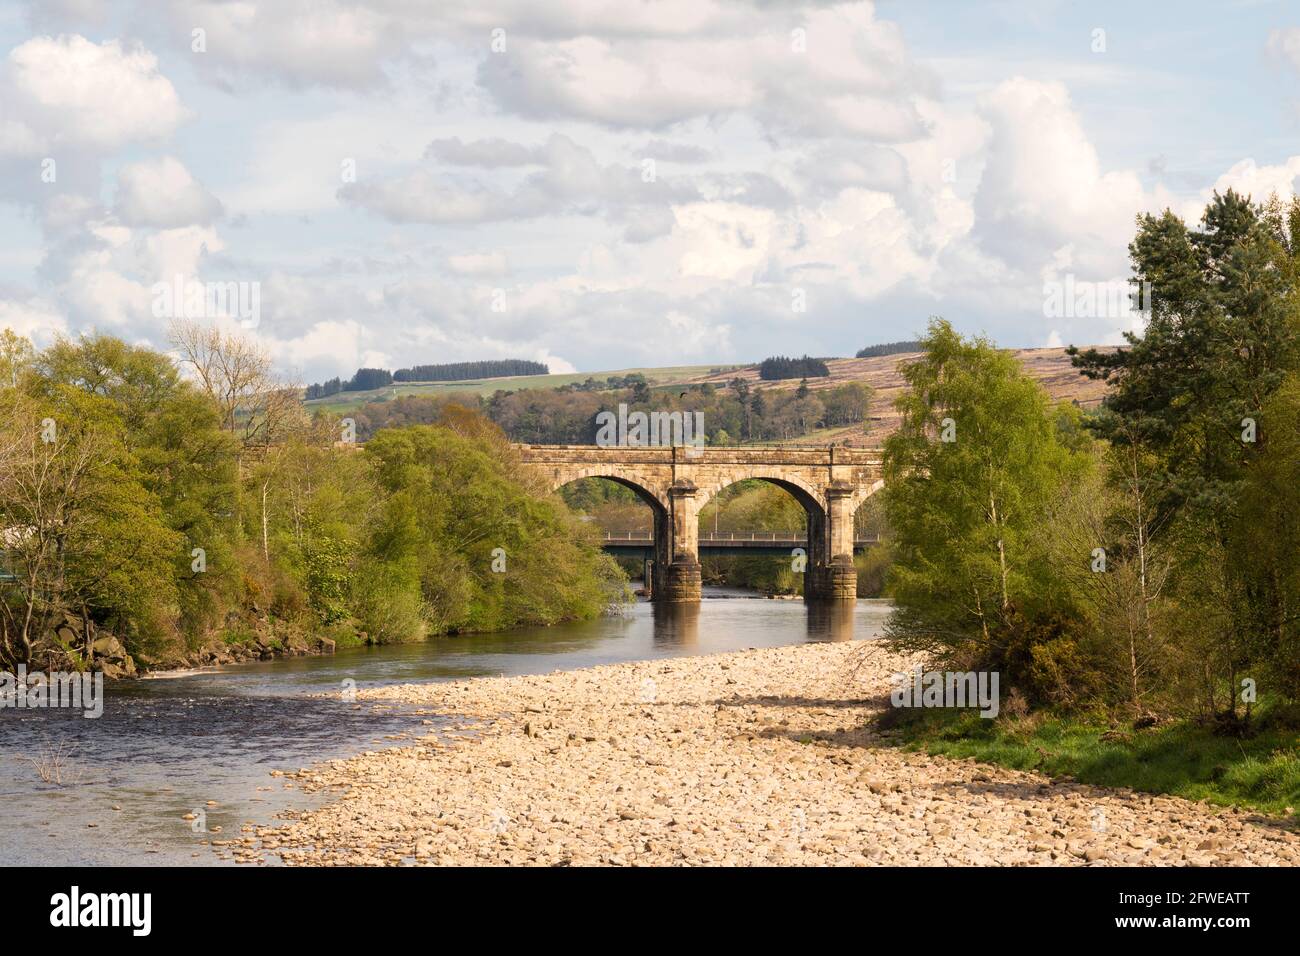 The old stone railway viaduct at Haltwhistle crossing the river South Tyne in Northumberland, England, UK Stock Photo